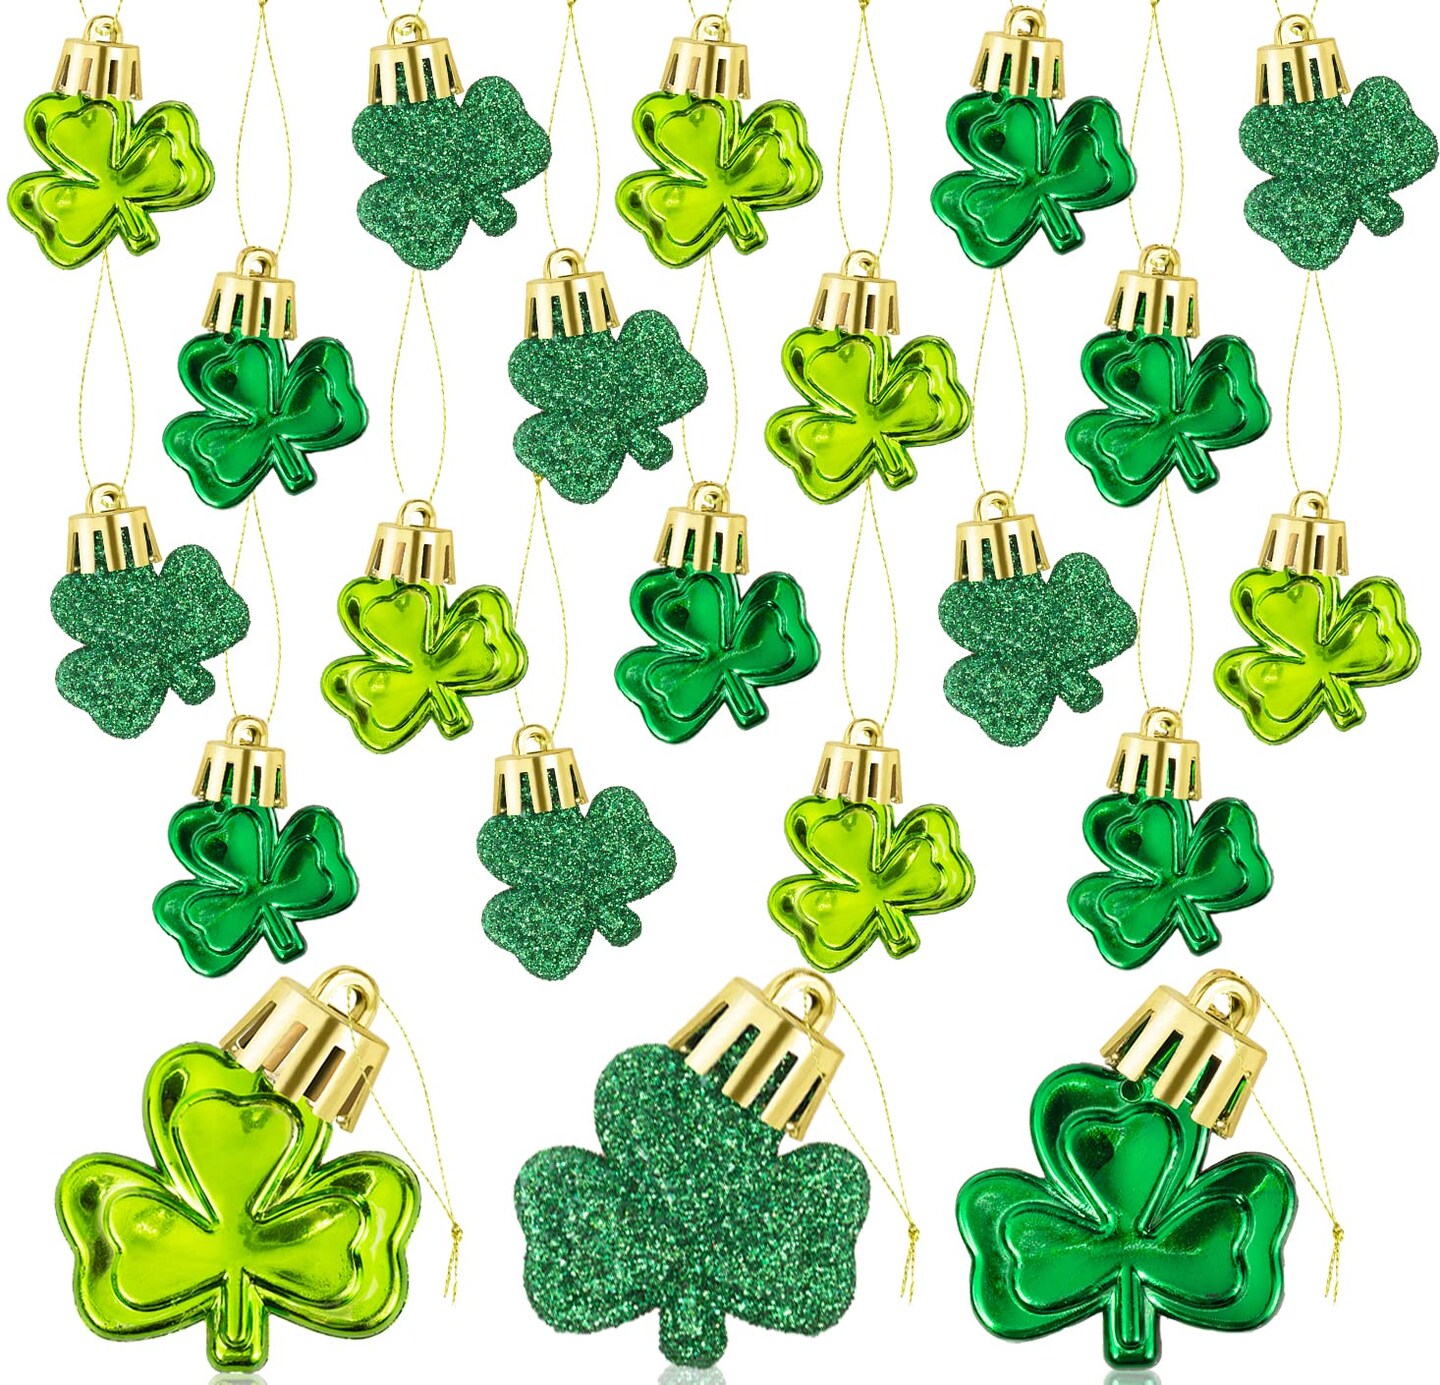 36pcs St Patrick&#x27;s Day Mini Shamrock Ornaments for Small Tree Decorations Good Luck Clover Hanging Bauble Green Trefoil Irish Ornaments for Saint Patrick&#x27;s Day Tree Shelf Decor Party Favors Supplies